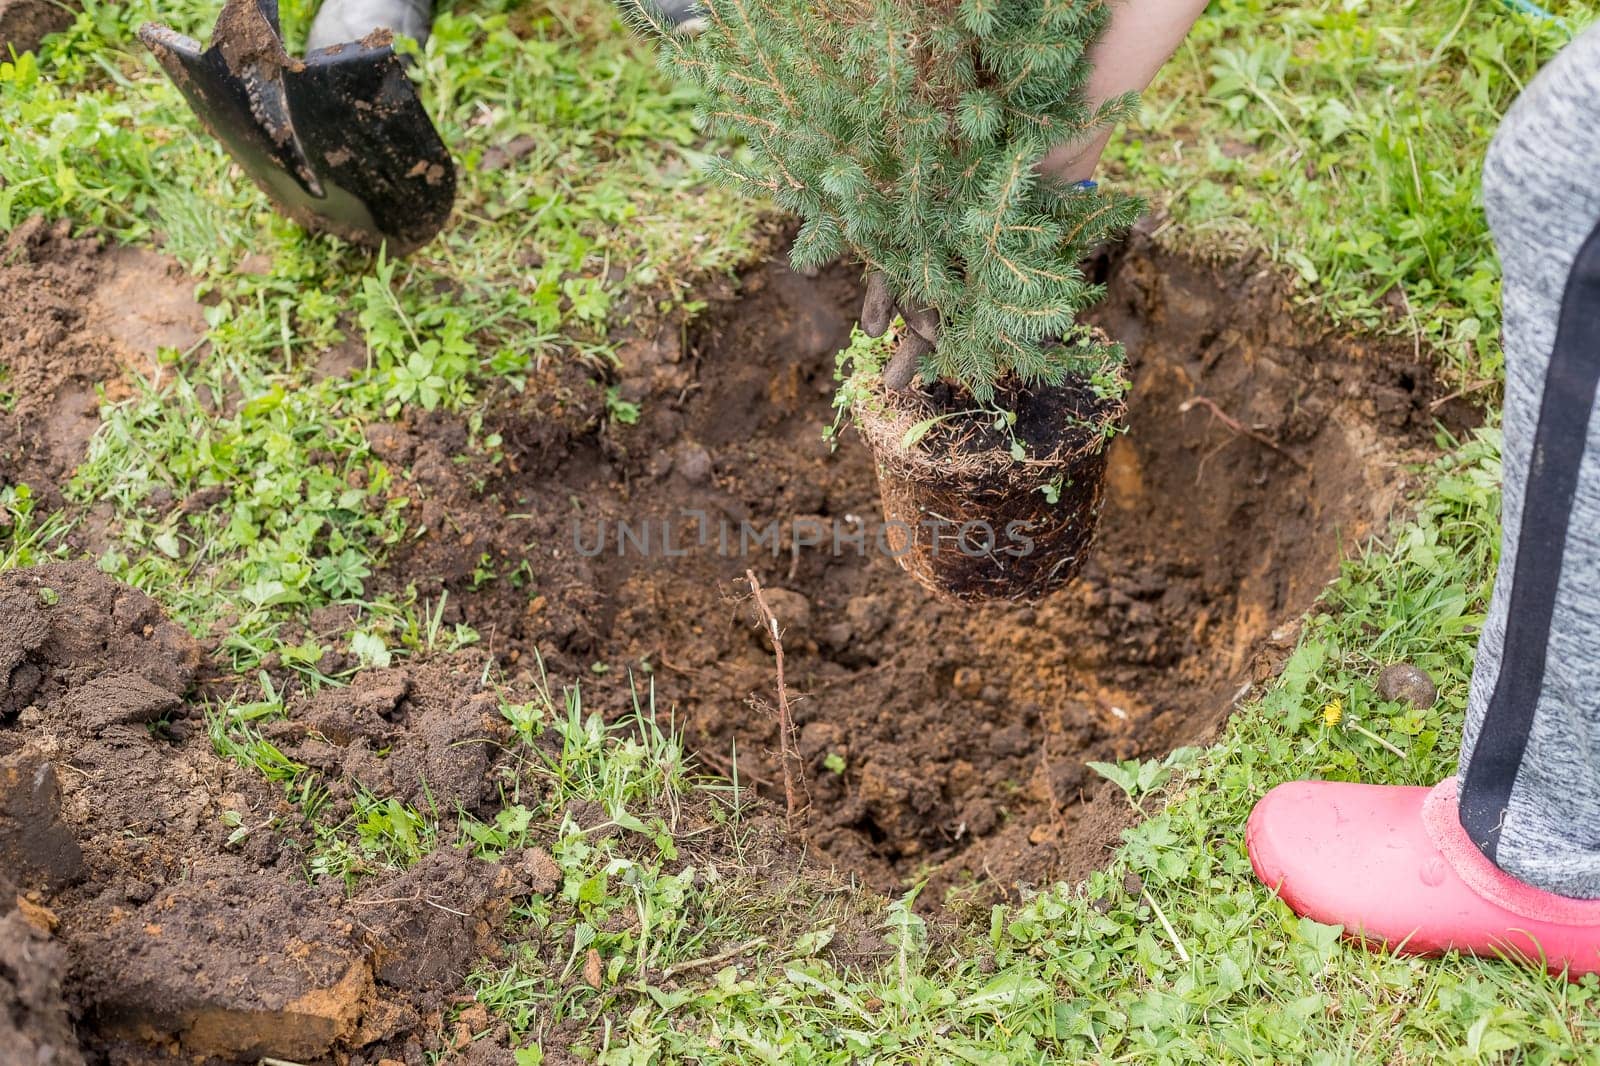 Digging out an old currant shrub with a garden shovel in the summer garden